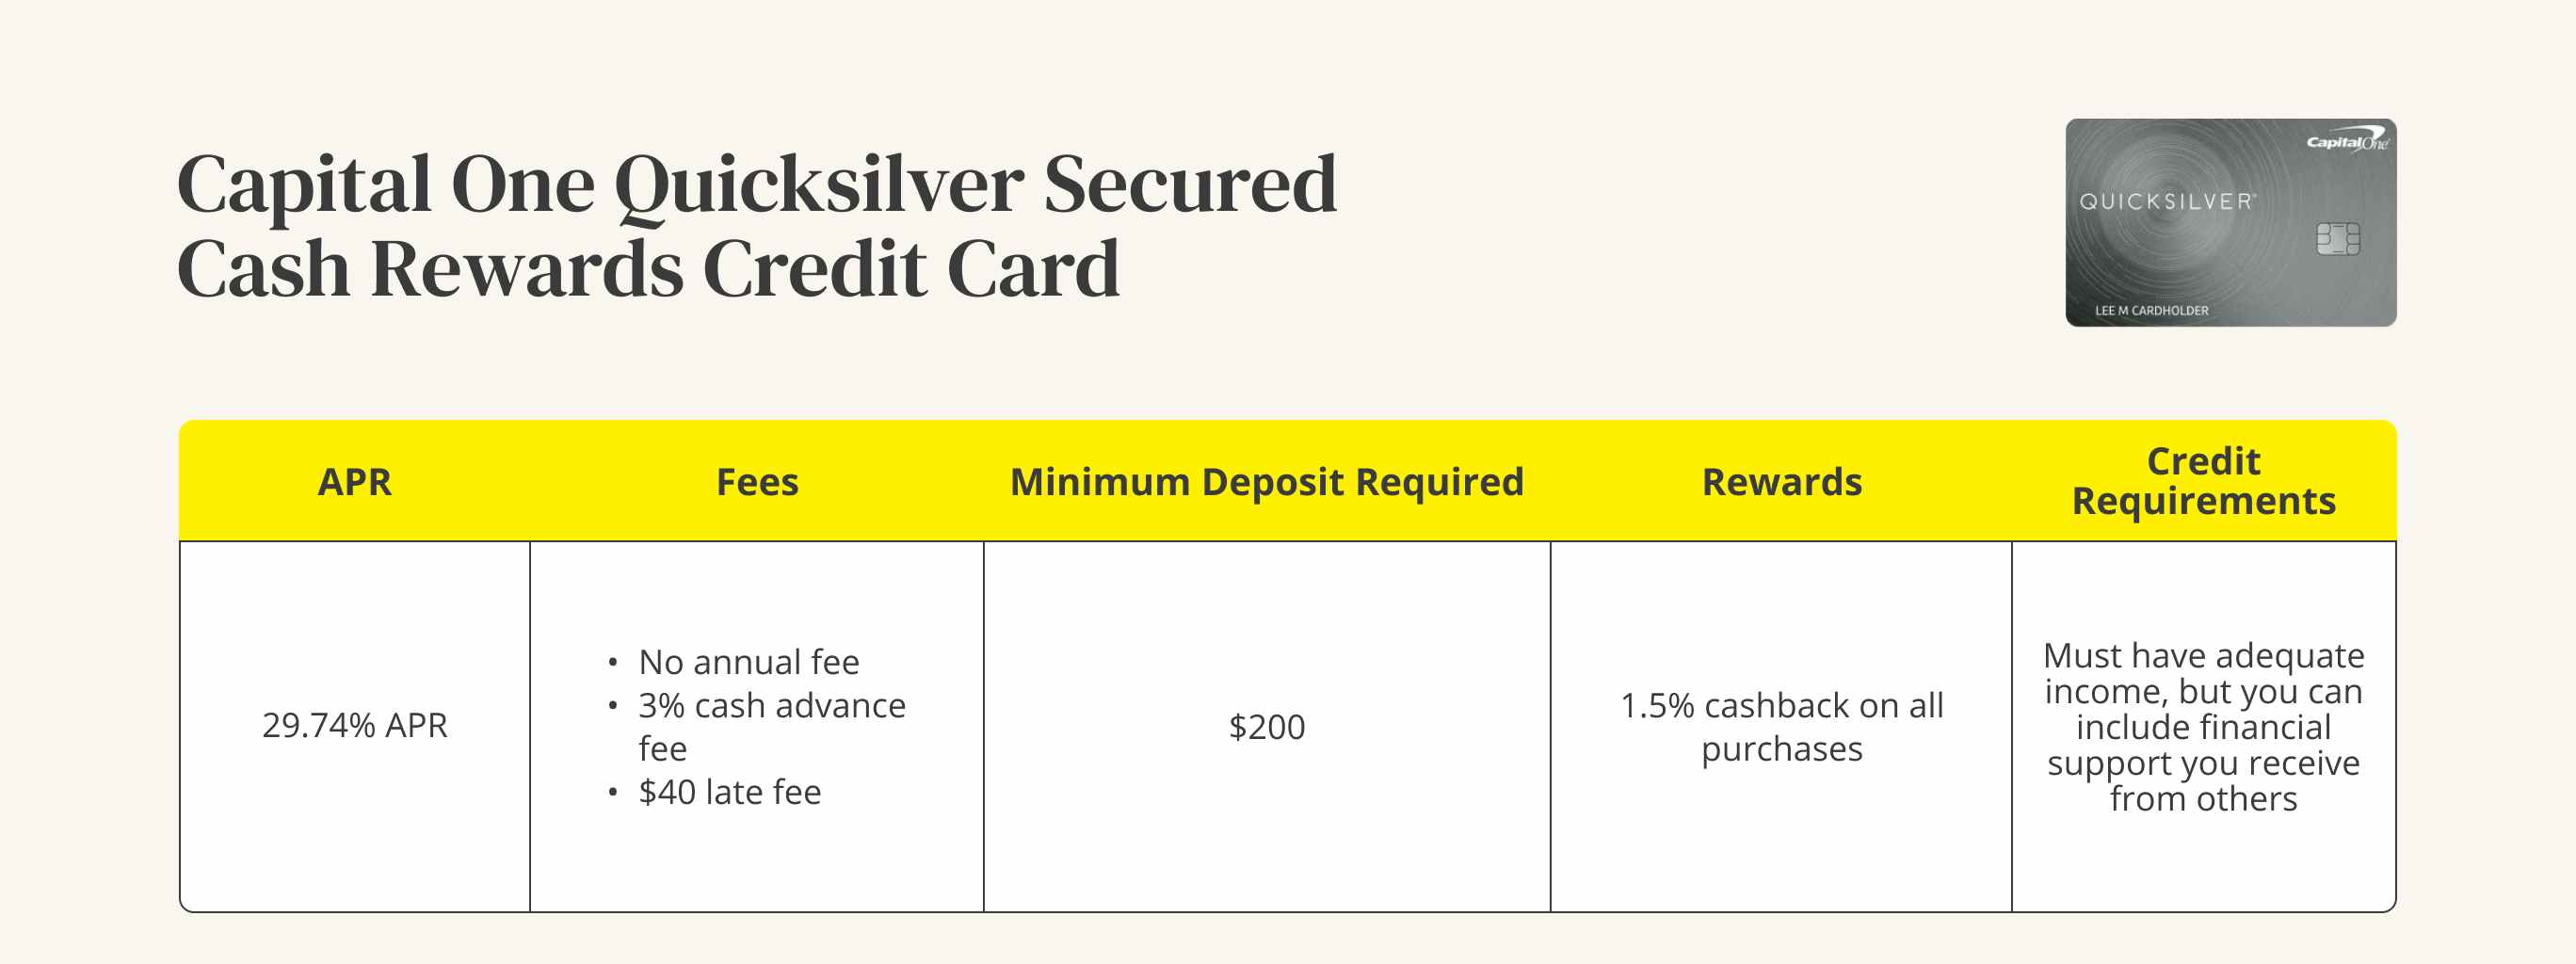 A graphic showing the APR, fees, minimum deposit, rewards, and credit requirements for a Capital One Quicksilver Secured credit card